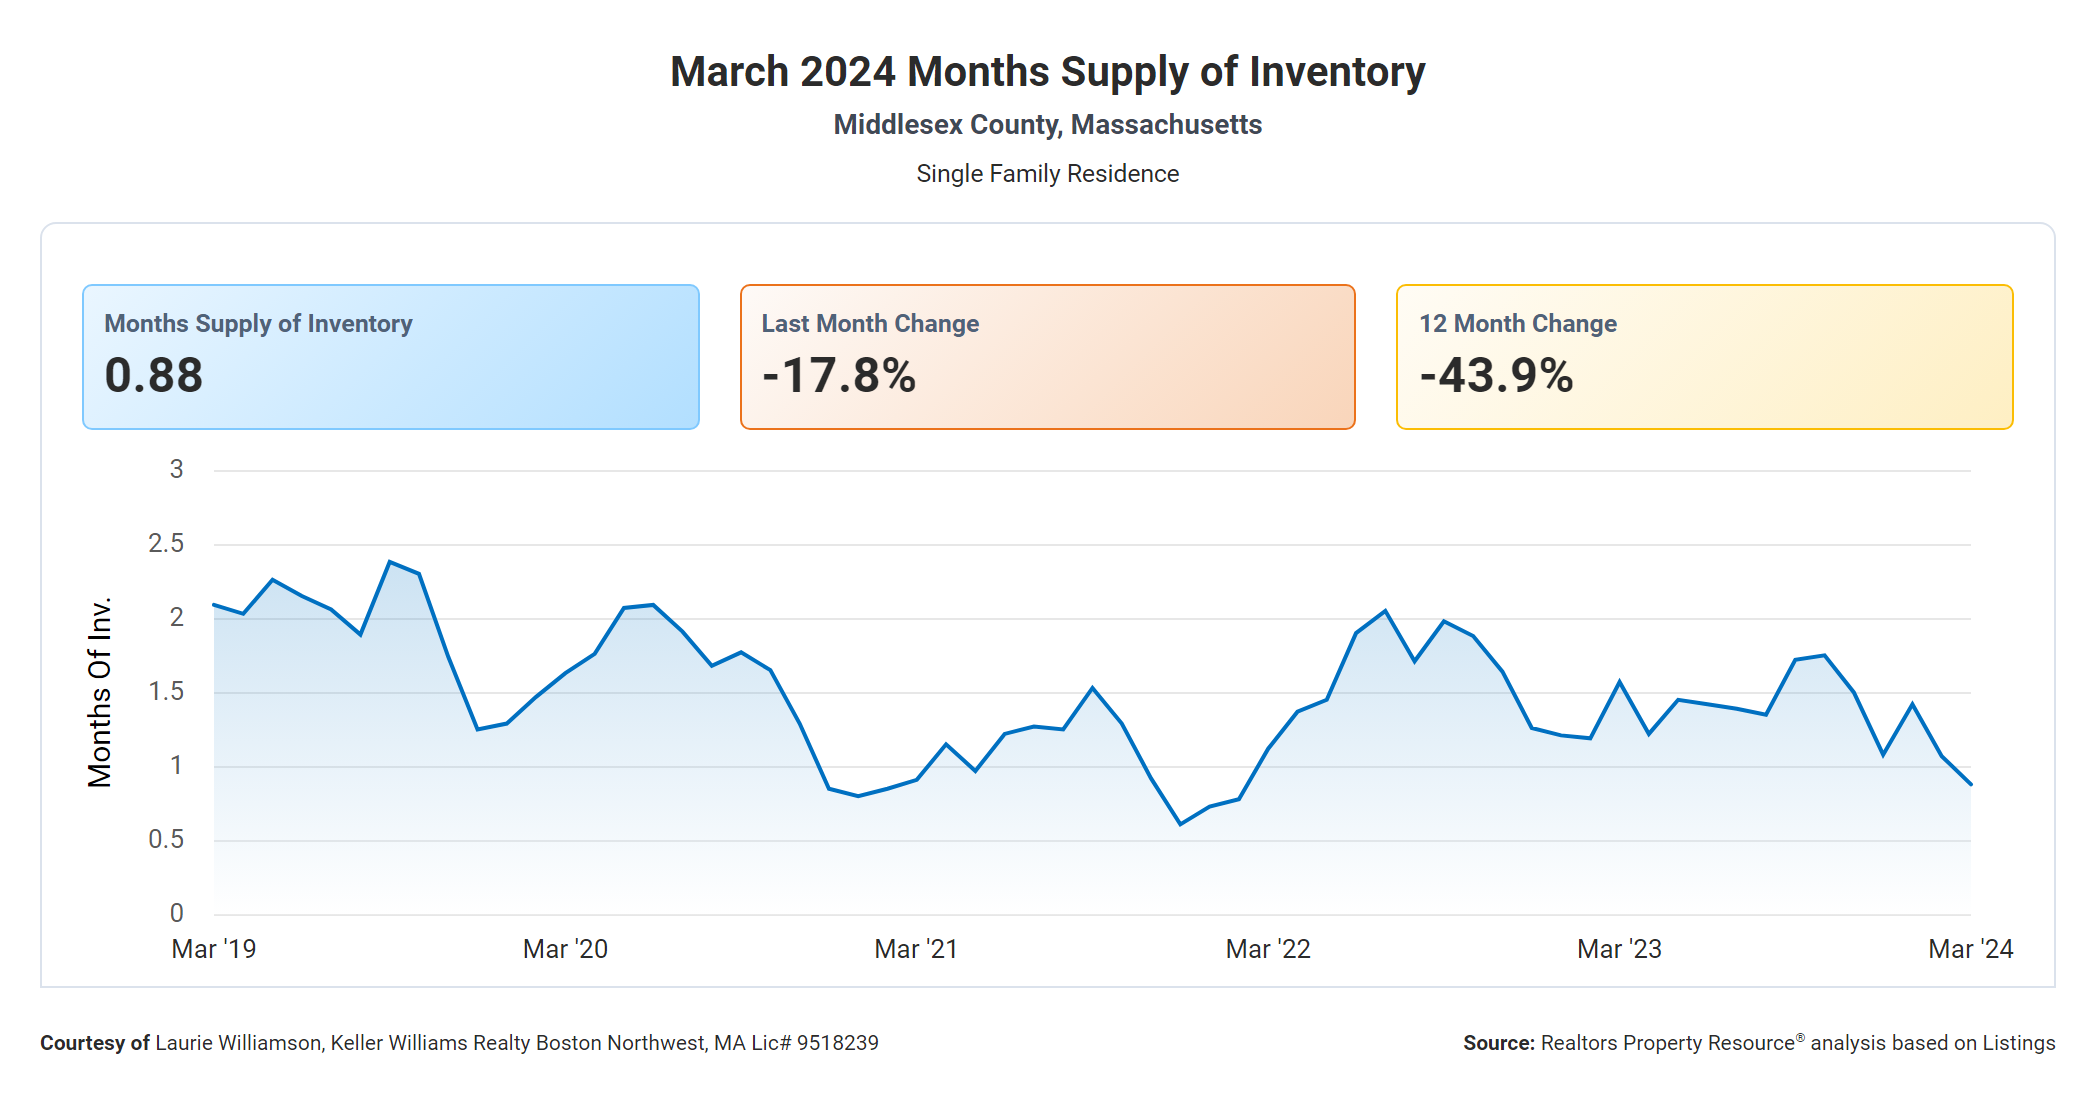 Months Supply of Inventory (March 2024)